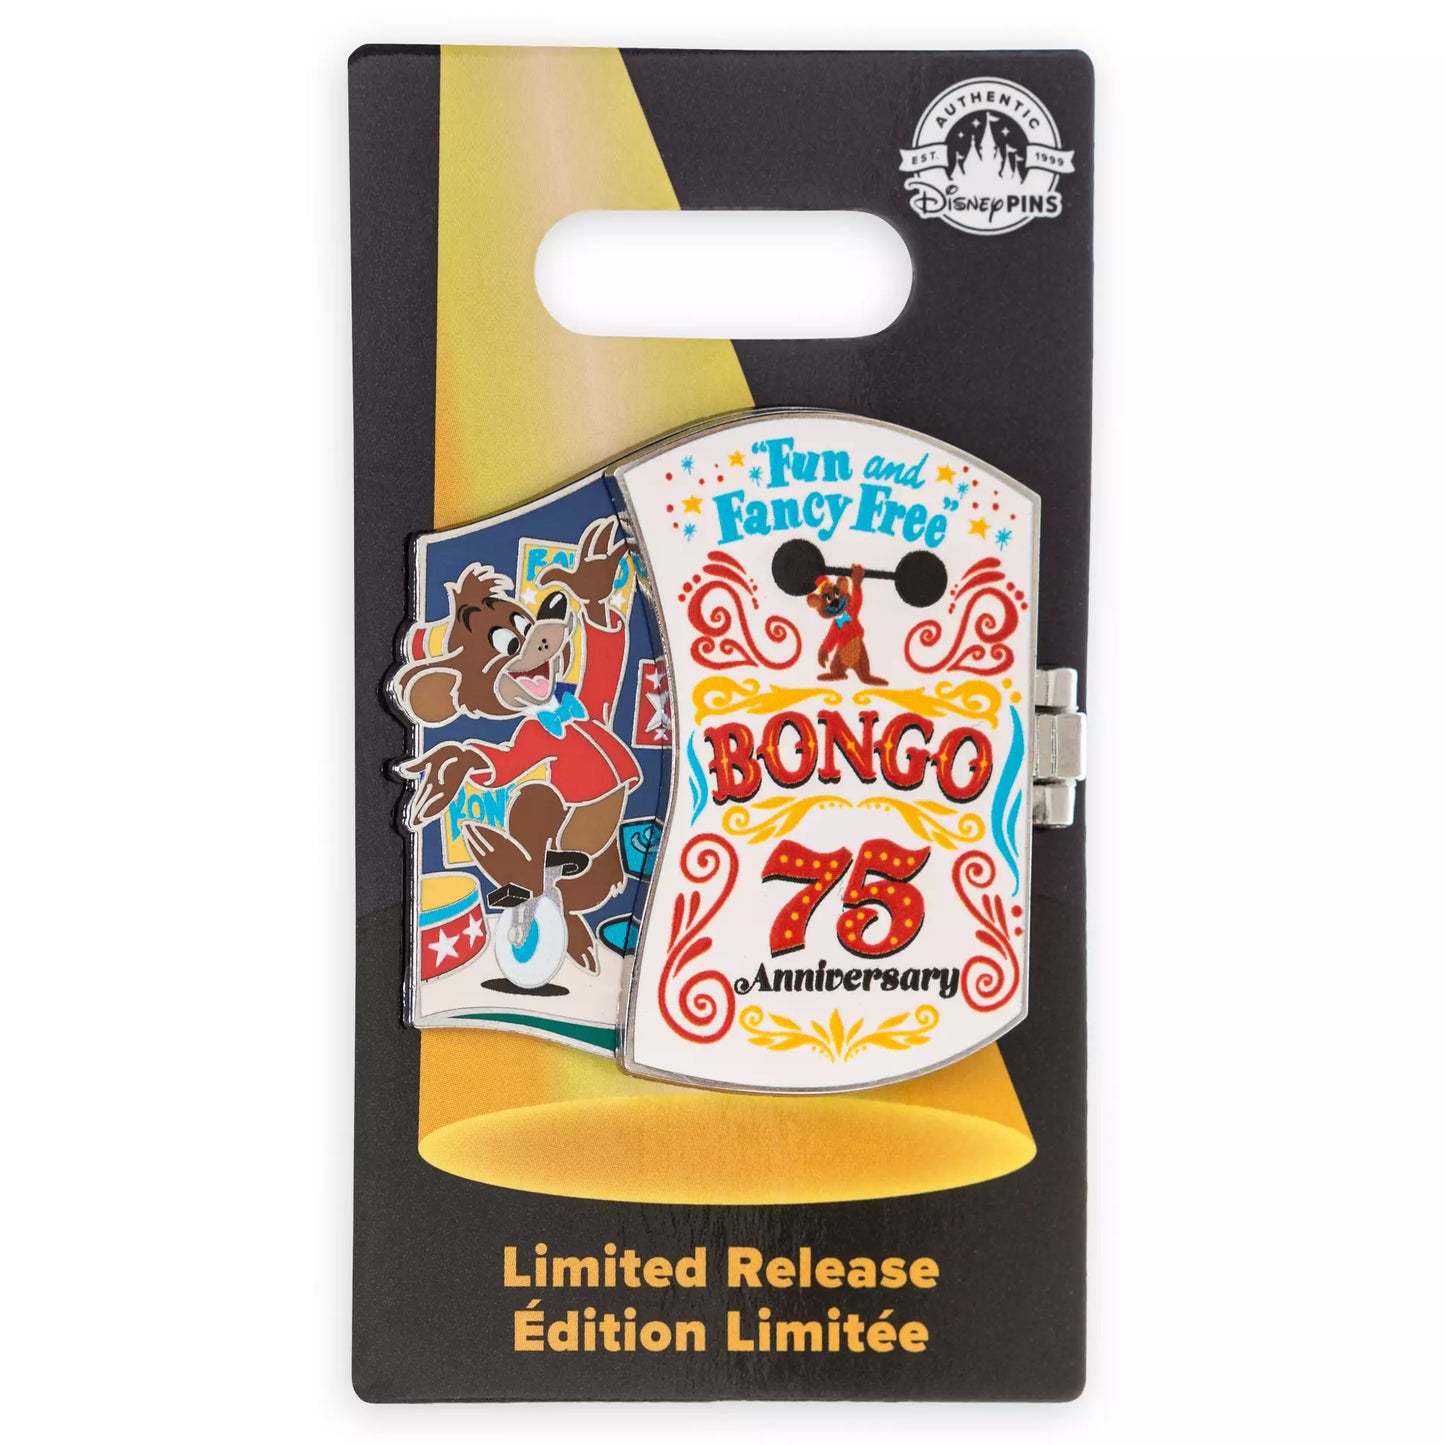 Bongo Hinged Pin – Fun and Fancy Free 75th Anniversary – Limited Release Pin